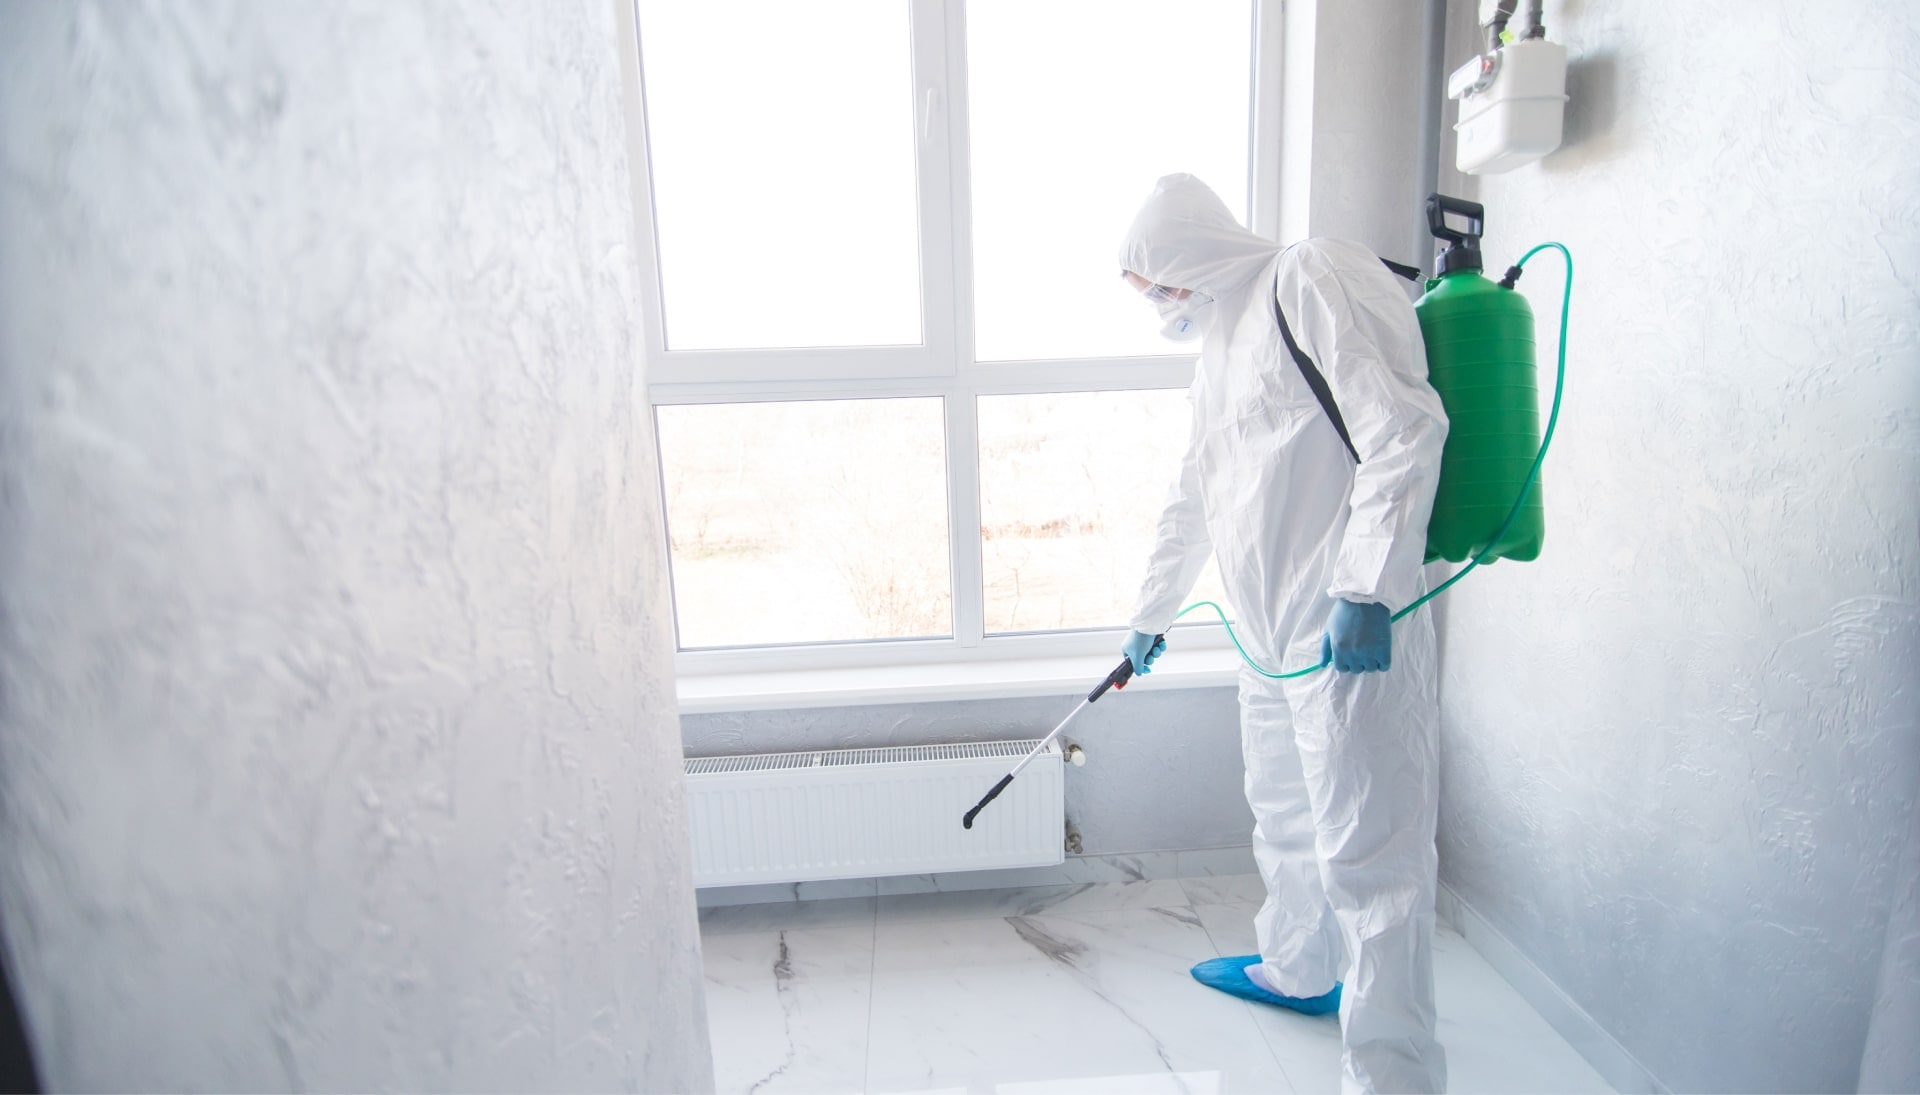 We provide the highest-quality mold inspection, testing, and removal services in the Charleston, South Carolina area.